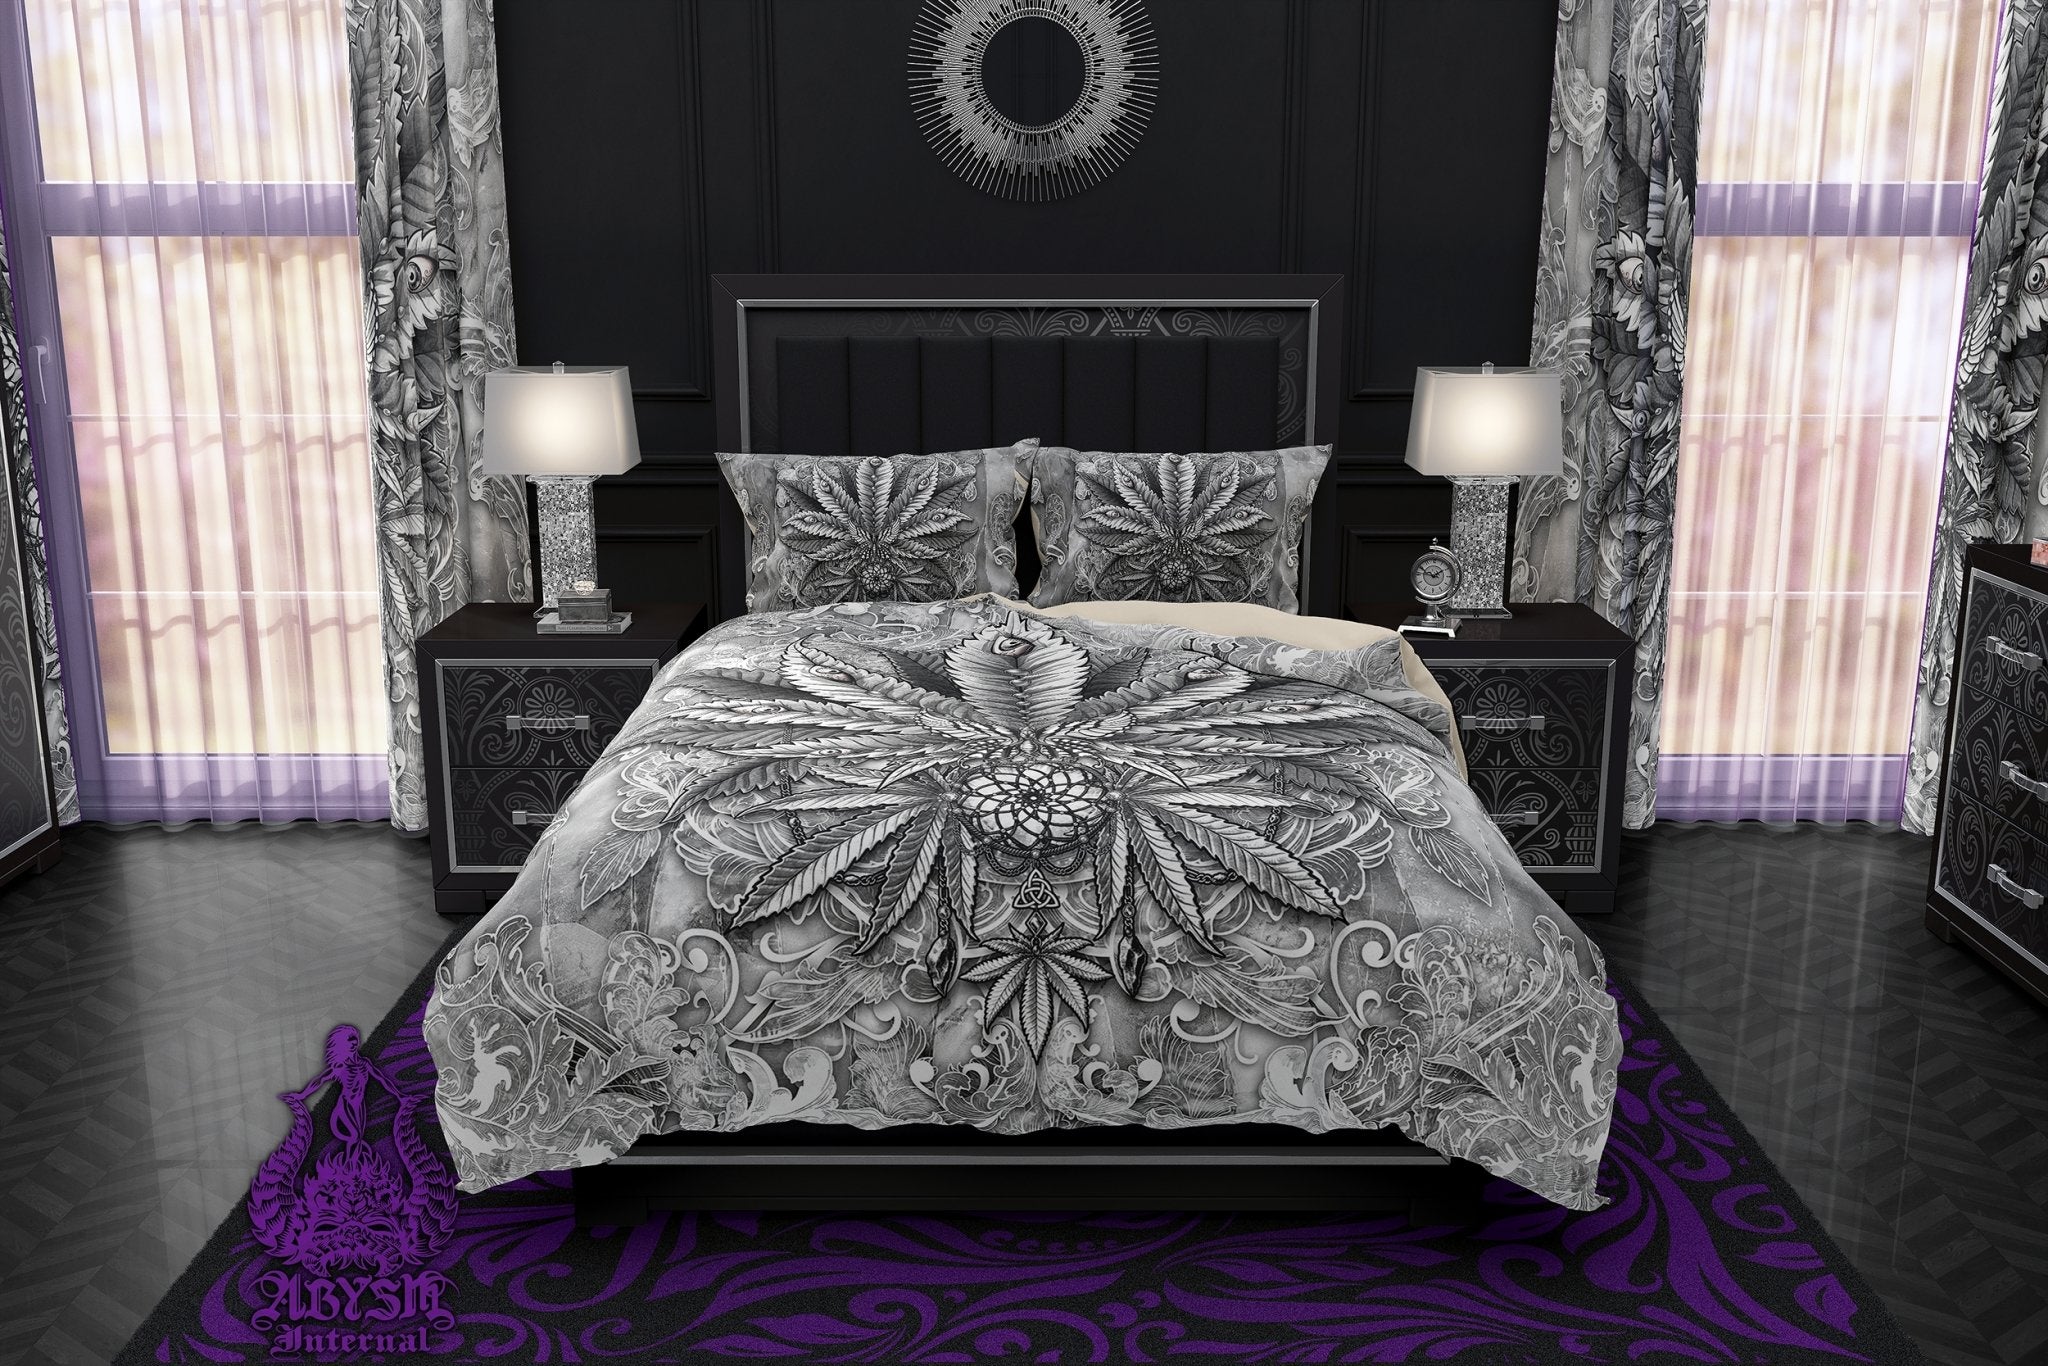 Weed Bedding Set, Comforter and Duvet, Cannabis Bed Cover, Marijuana Bedroom Decor, King, Queen and Twin Size, 420 Room Art - White Goth, Black and White, Stone - Abysm Internal